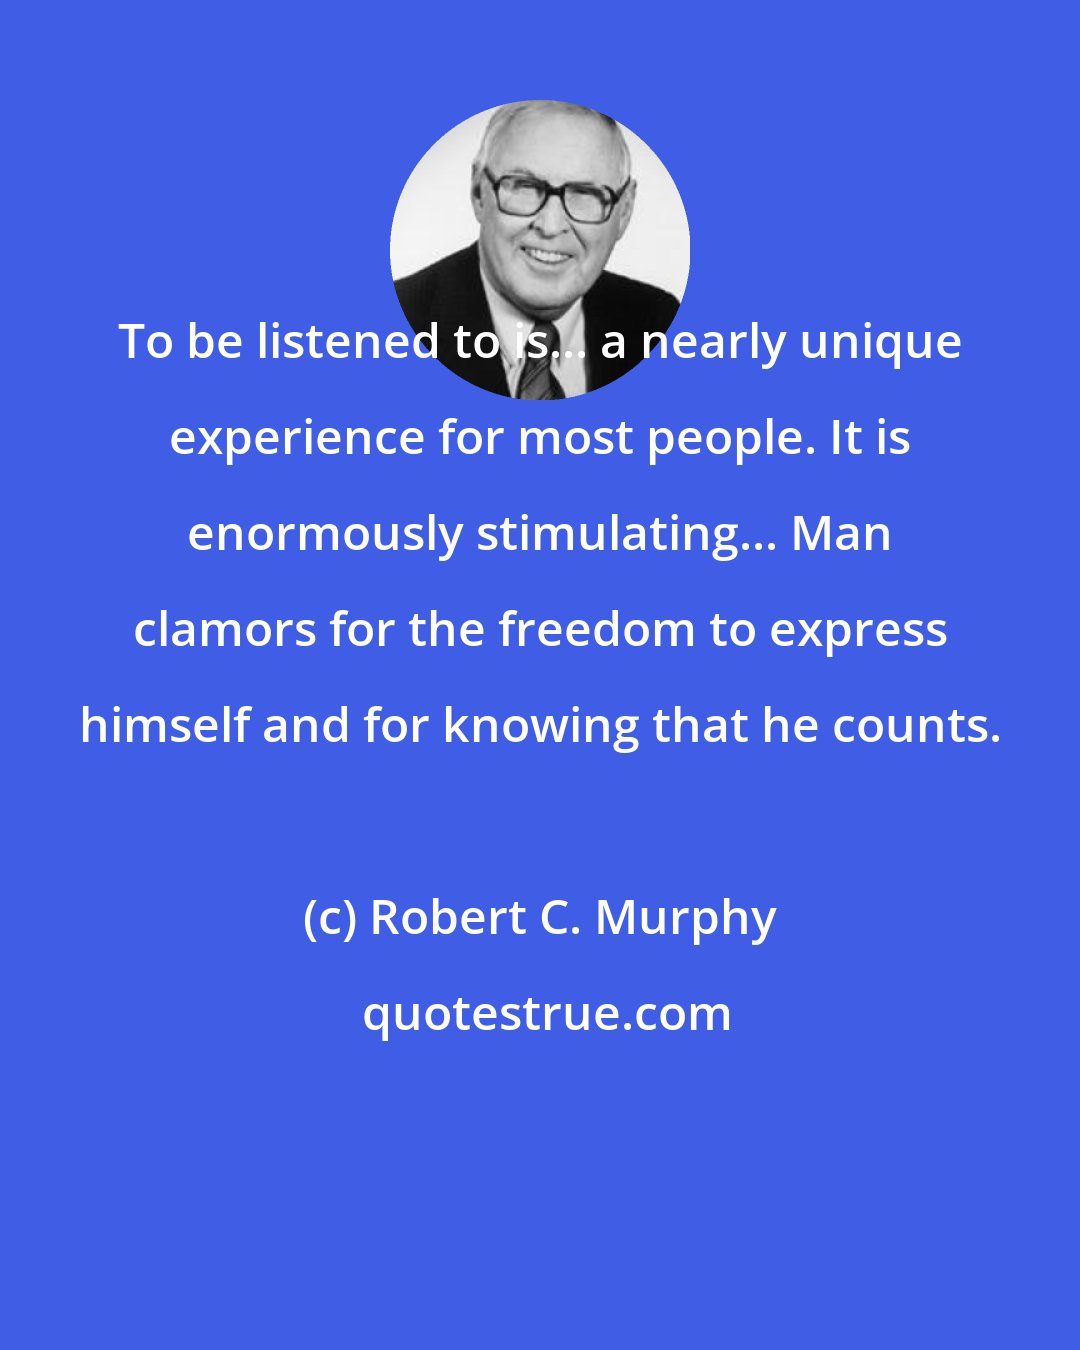 Robert C. Murphy: To be listened to is... a nearly unique experience for most people. It is enormously stimulating... Man clamors for the freedom to express himself and for knowing that he counts.